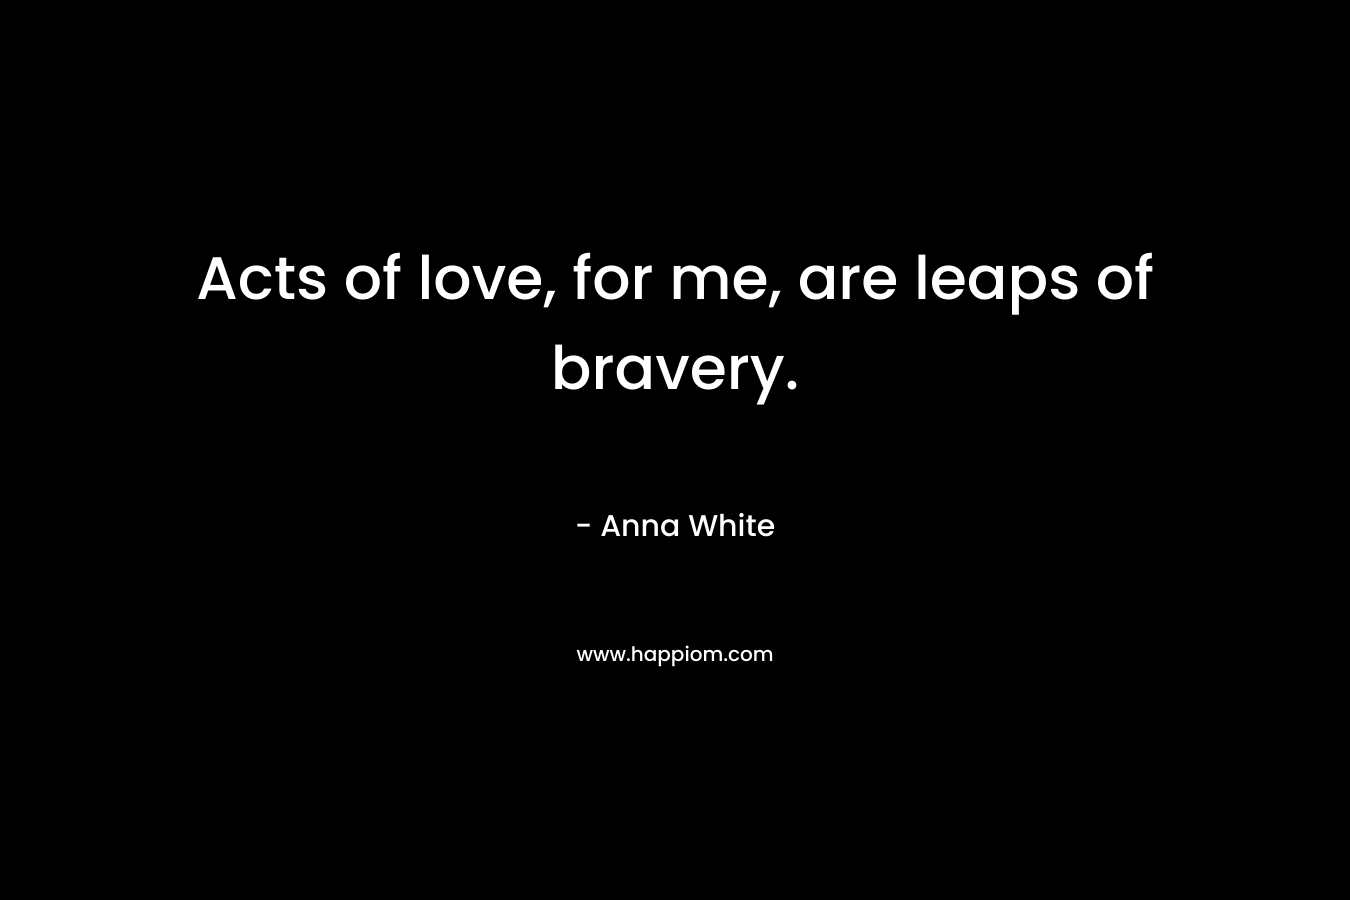 Acts of love, for me, are leaps of bravery. – Anna White